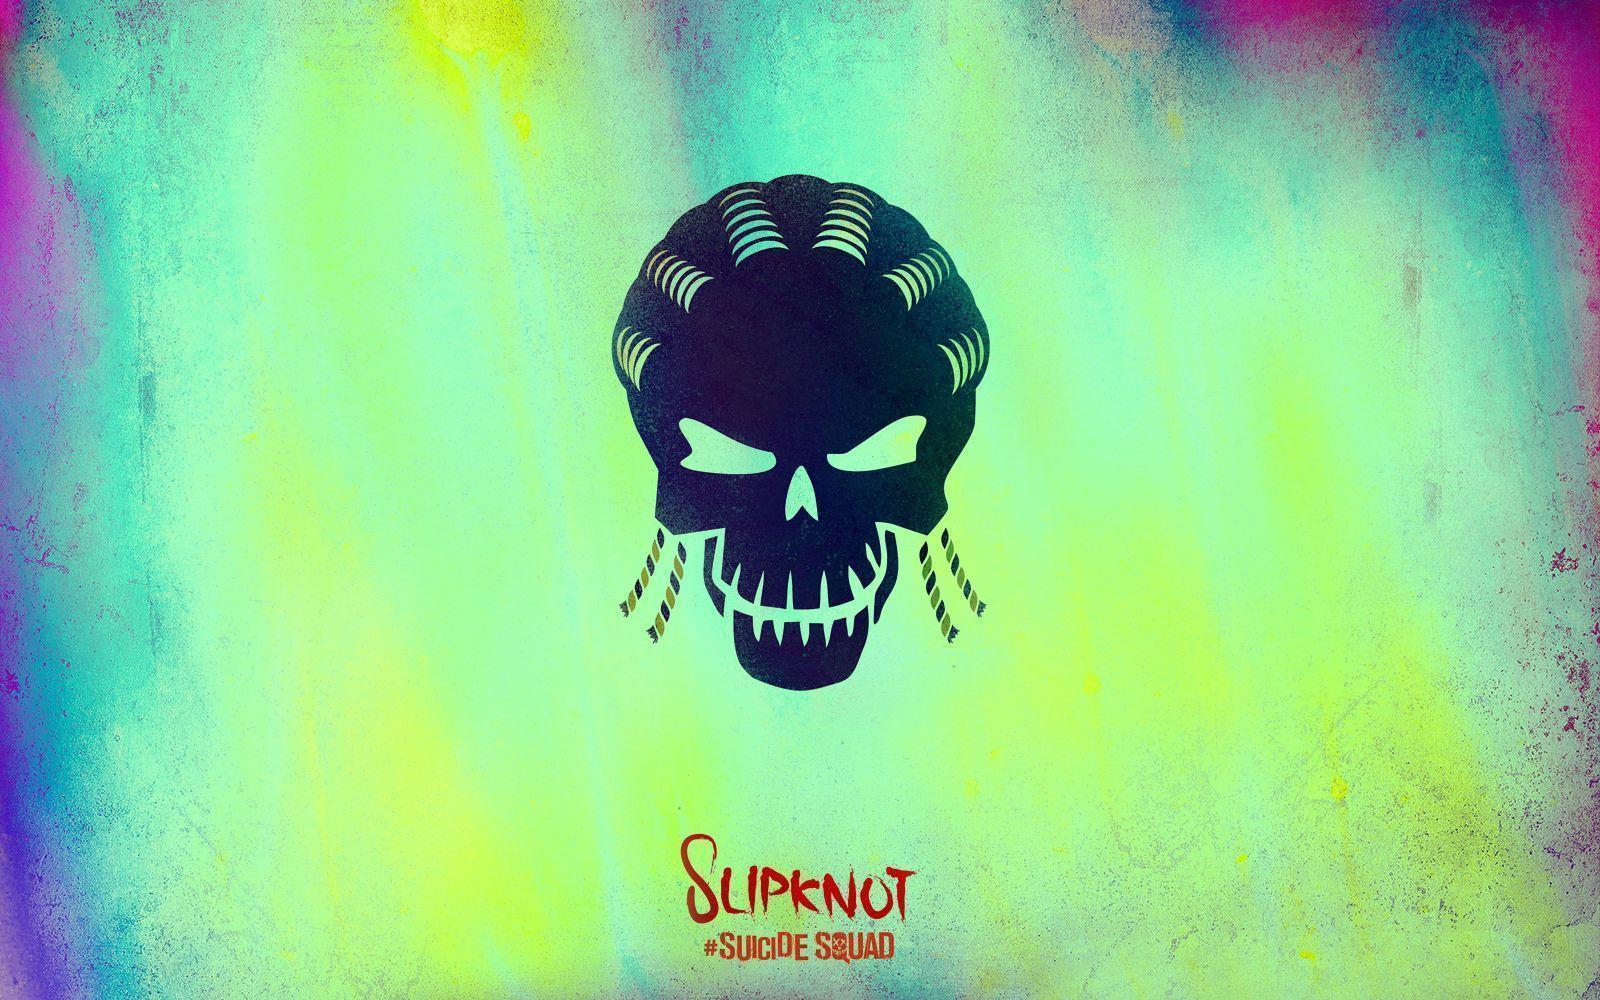 Download the cool, minimalist skull wallpaper from Suicide